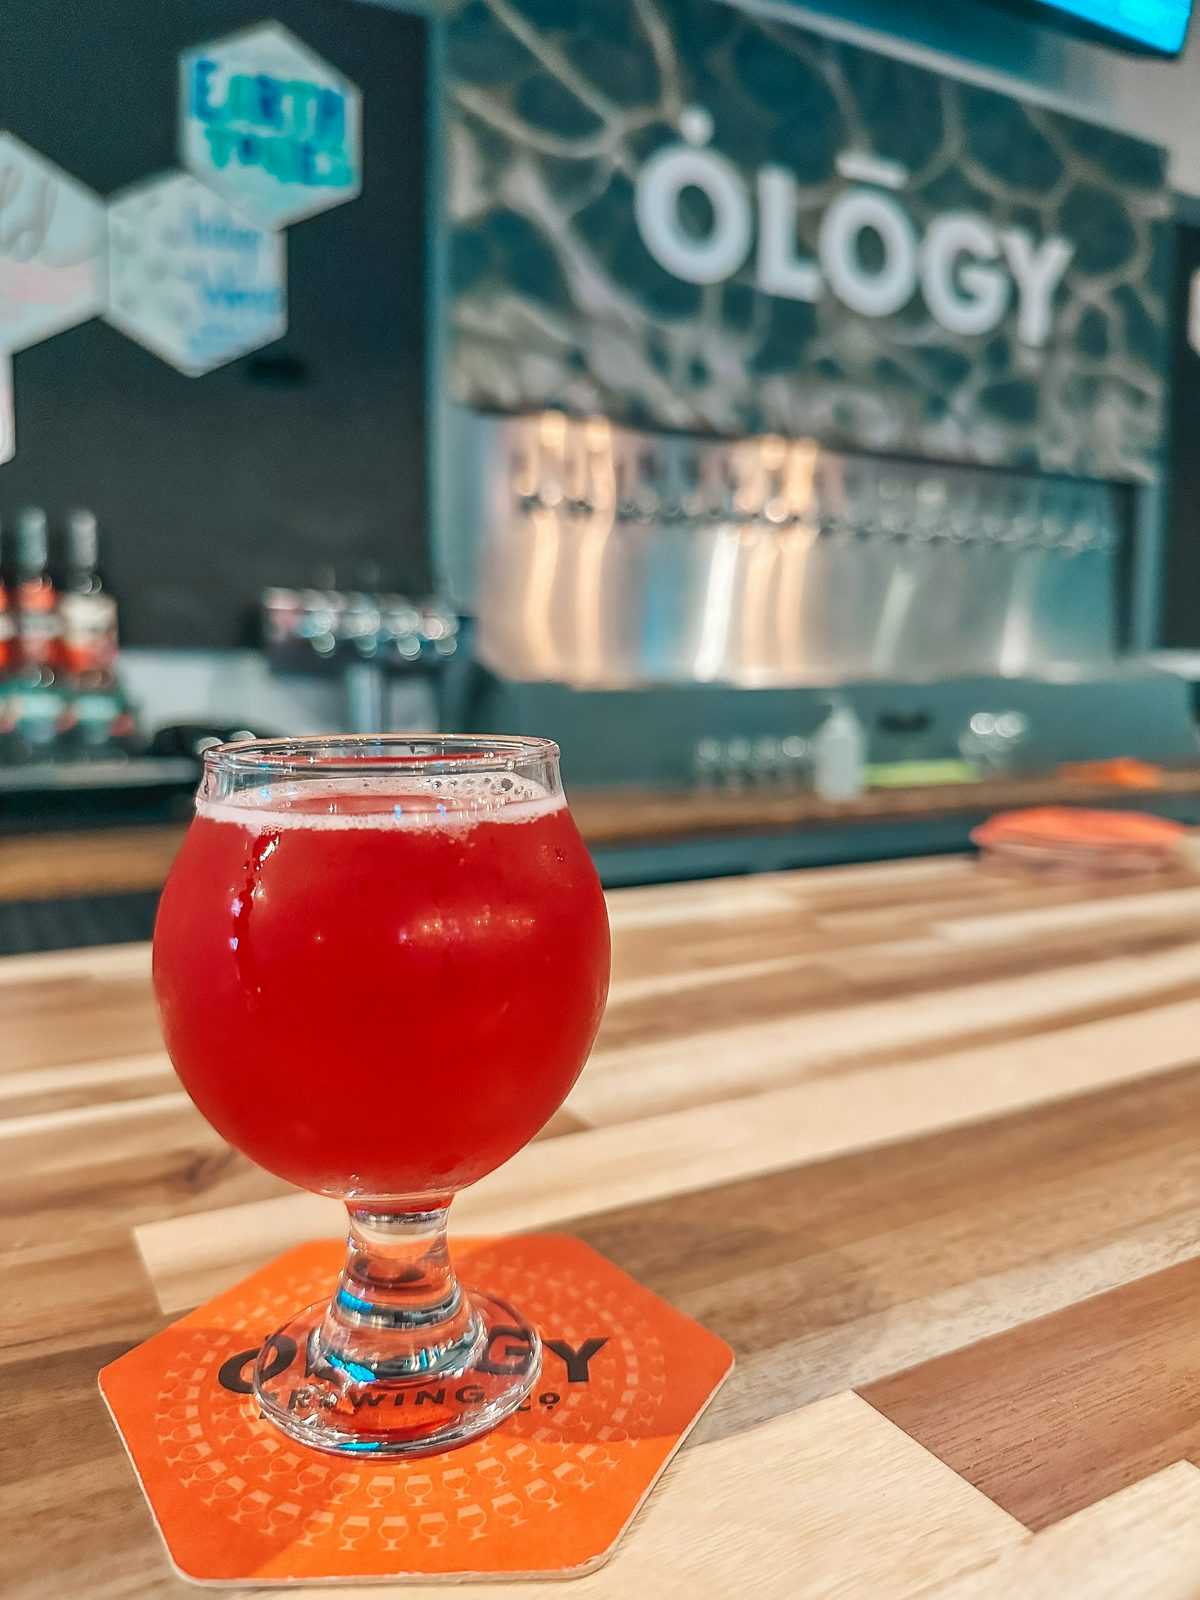 Ology Brewing sour in Seminole Heights